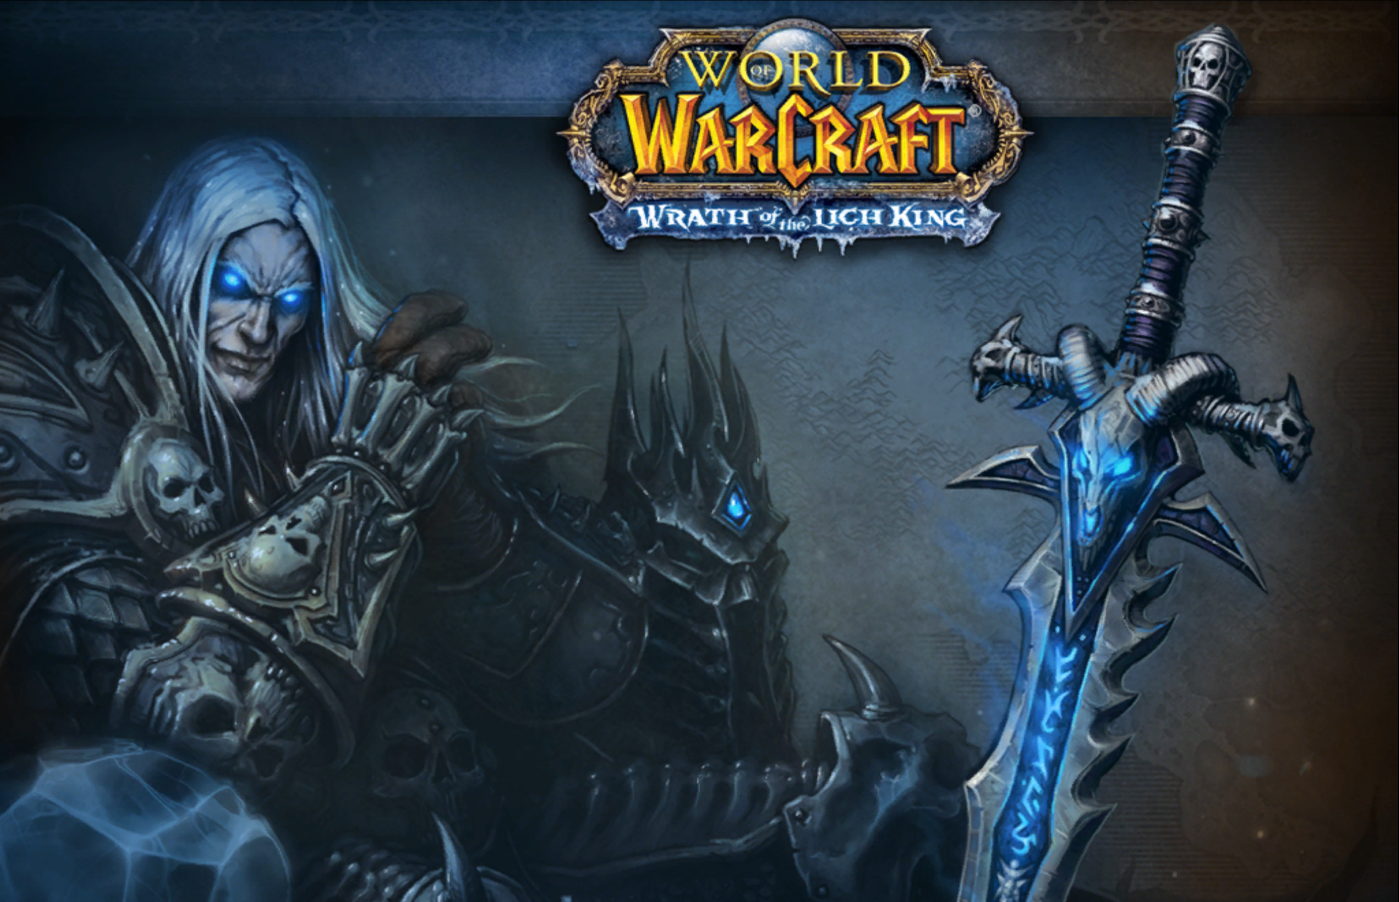 World Of Warcraft: Wrath Of The Lich King #19